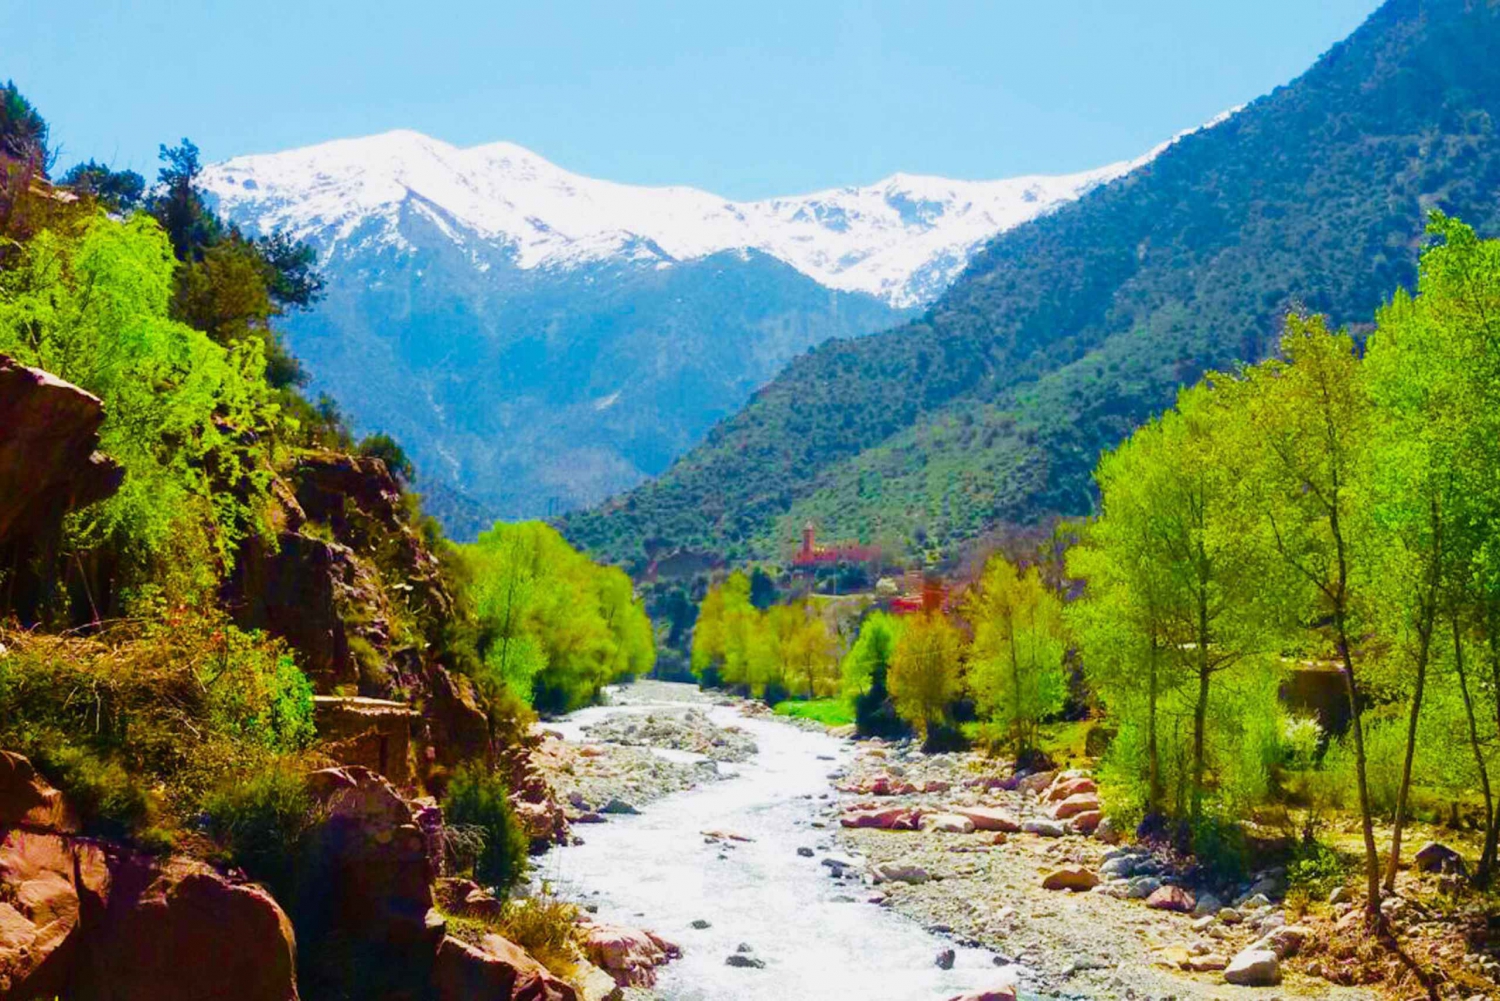 Half Day Tour From Marrakech to the Atlas Mountains & Ourika